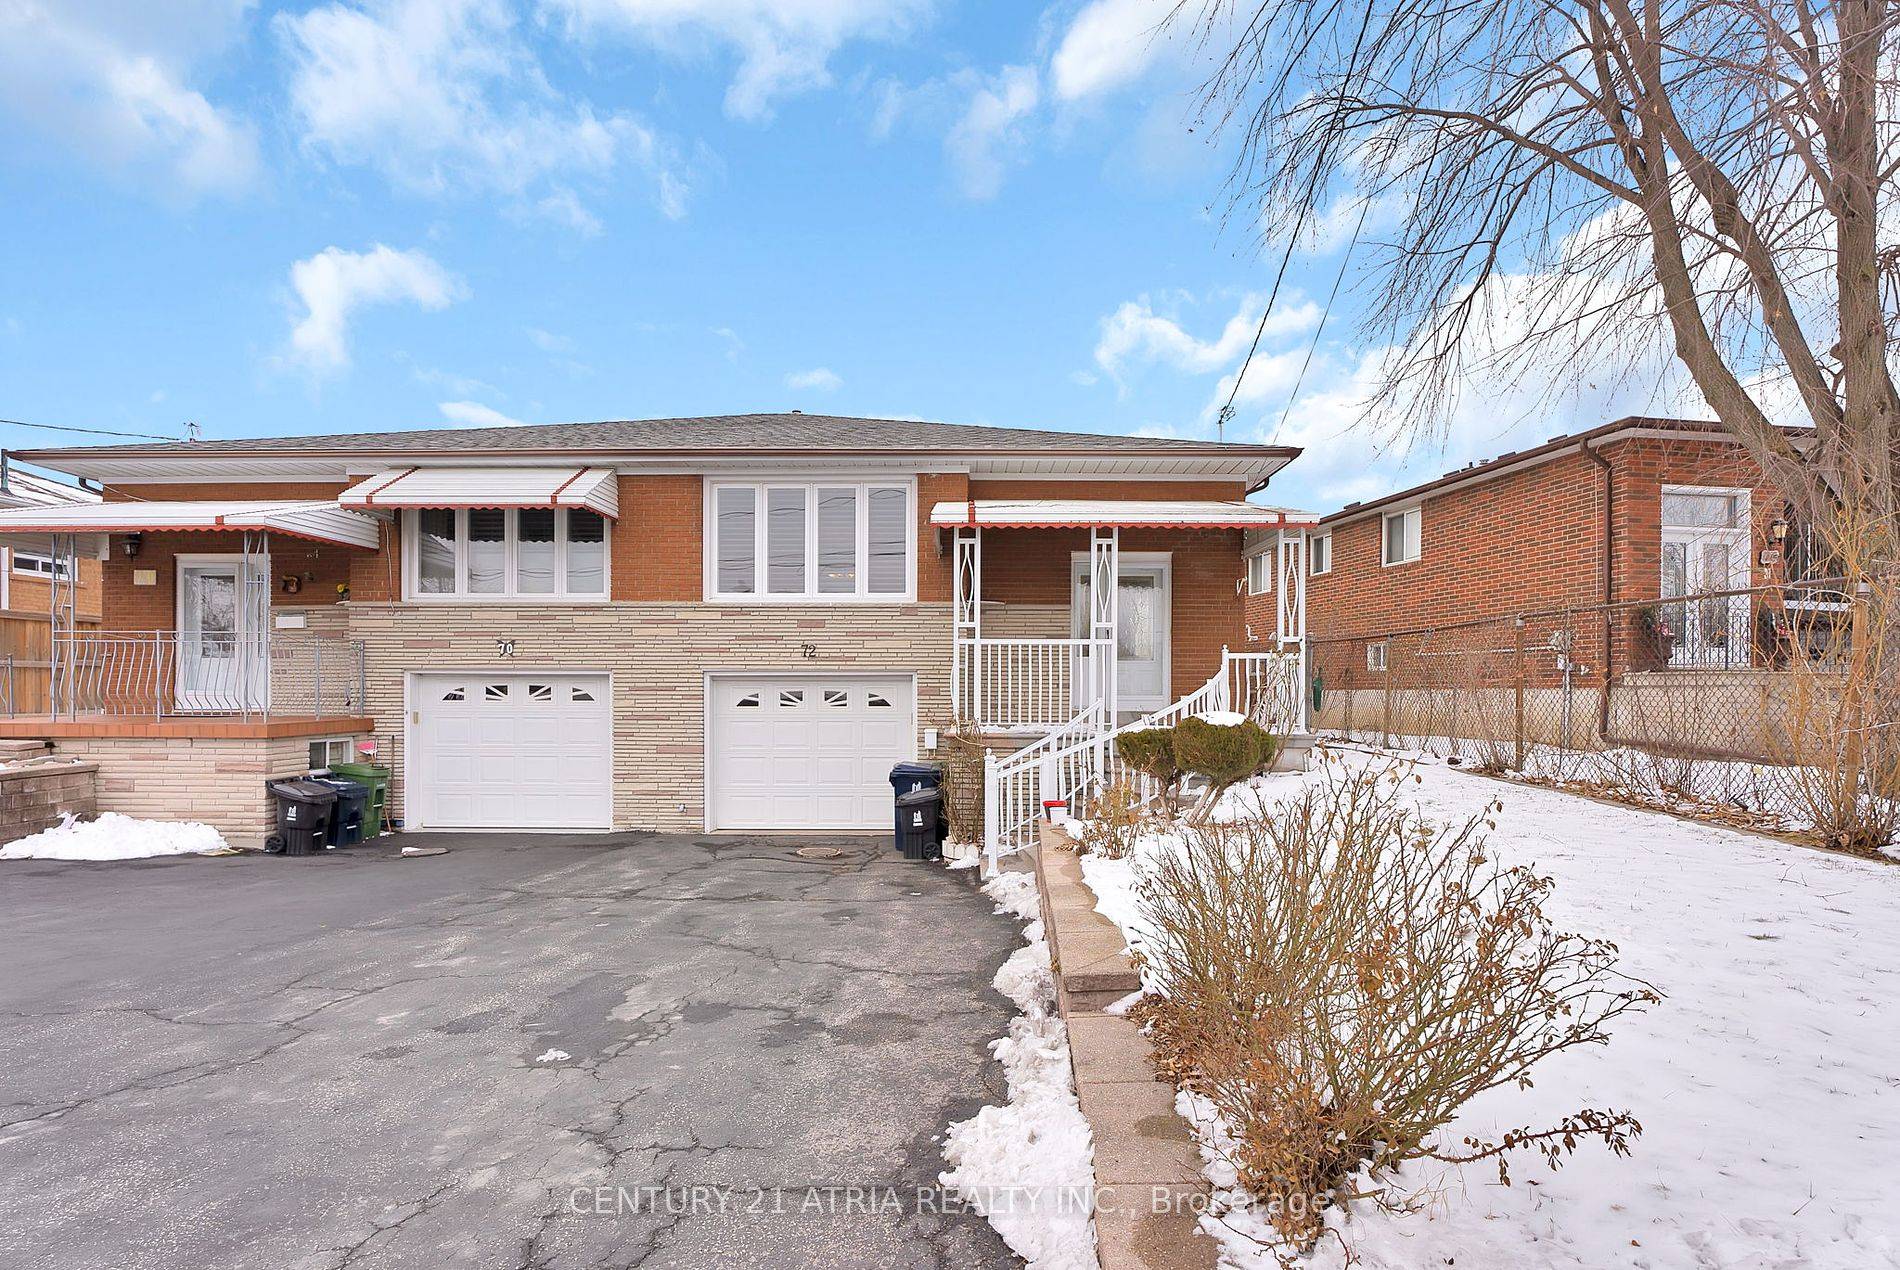 Discover unparalleled investment opportunity in Toronto's Glenfield Jane Heights area with thissemi detached raised bungalow, a gem for investors or families.